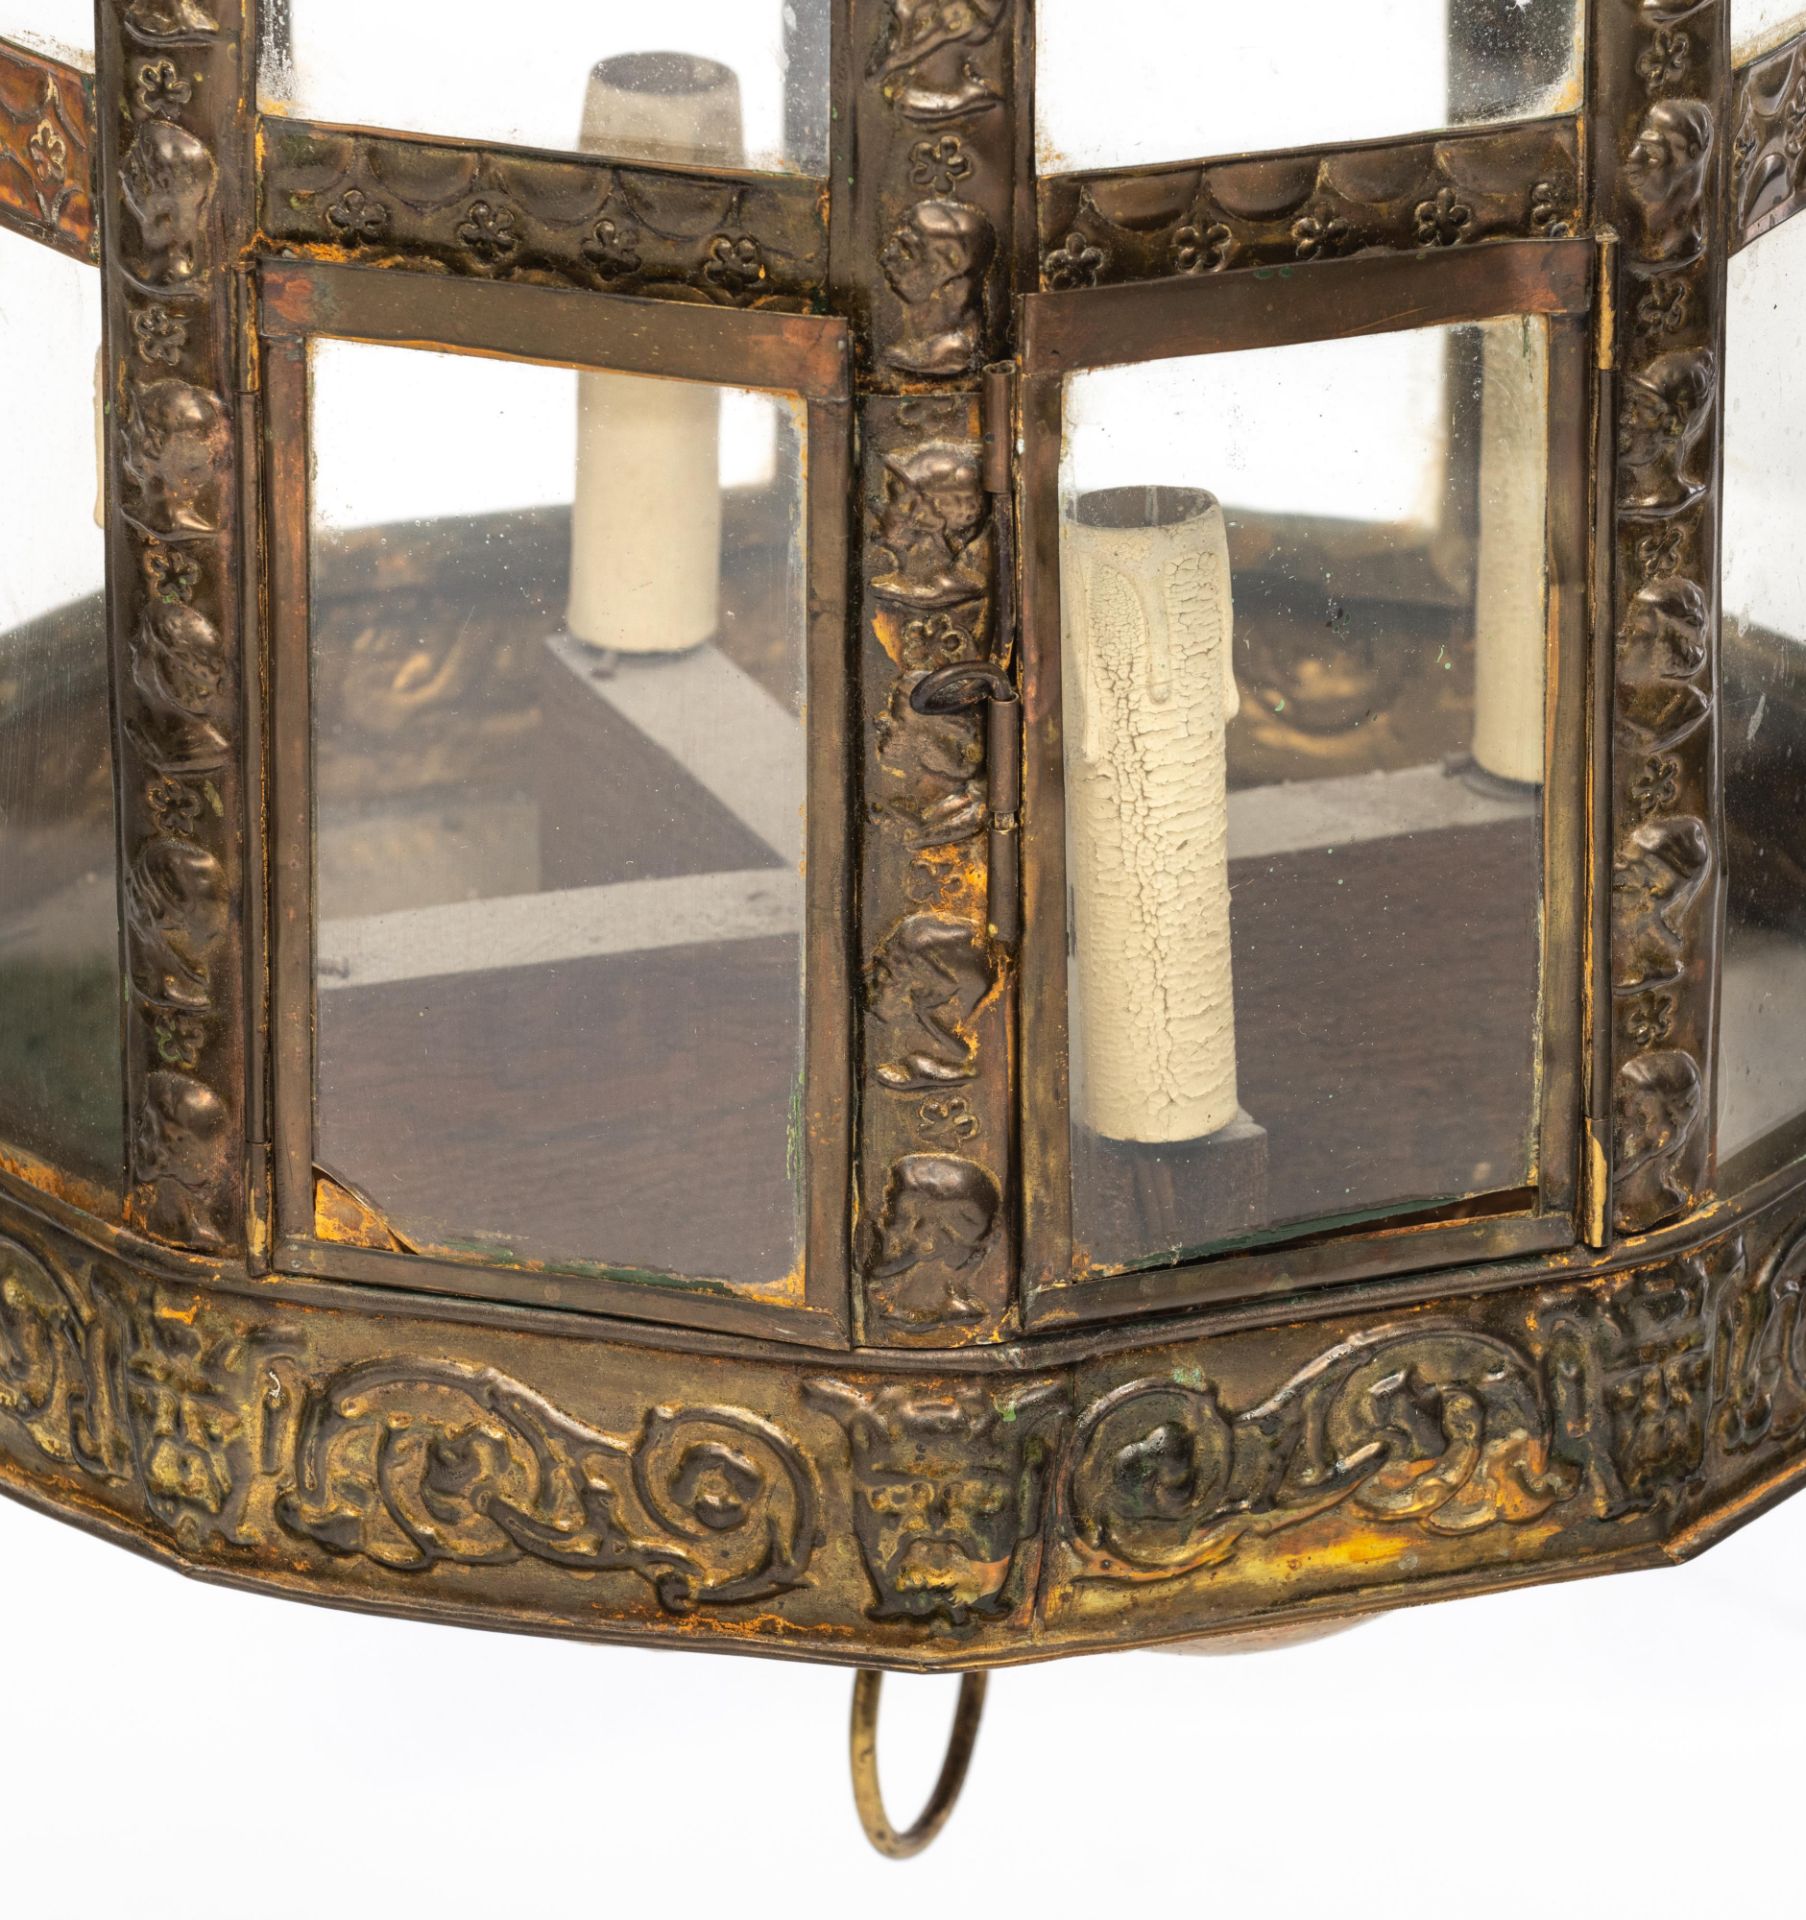 A Low-Countries brass lantern in a 17thC manner (possibly of the period or 19thC), H all-in 88 cm, , - Bild 4 aus 9